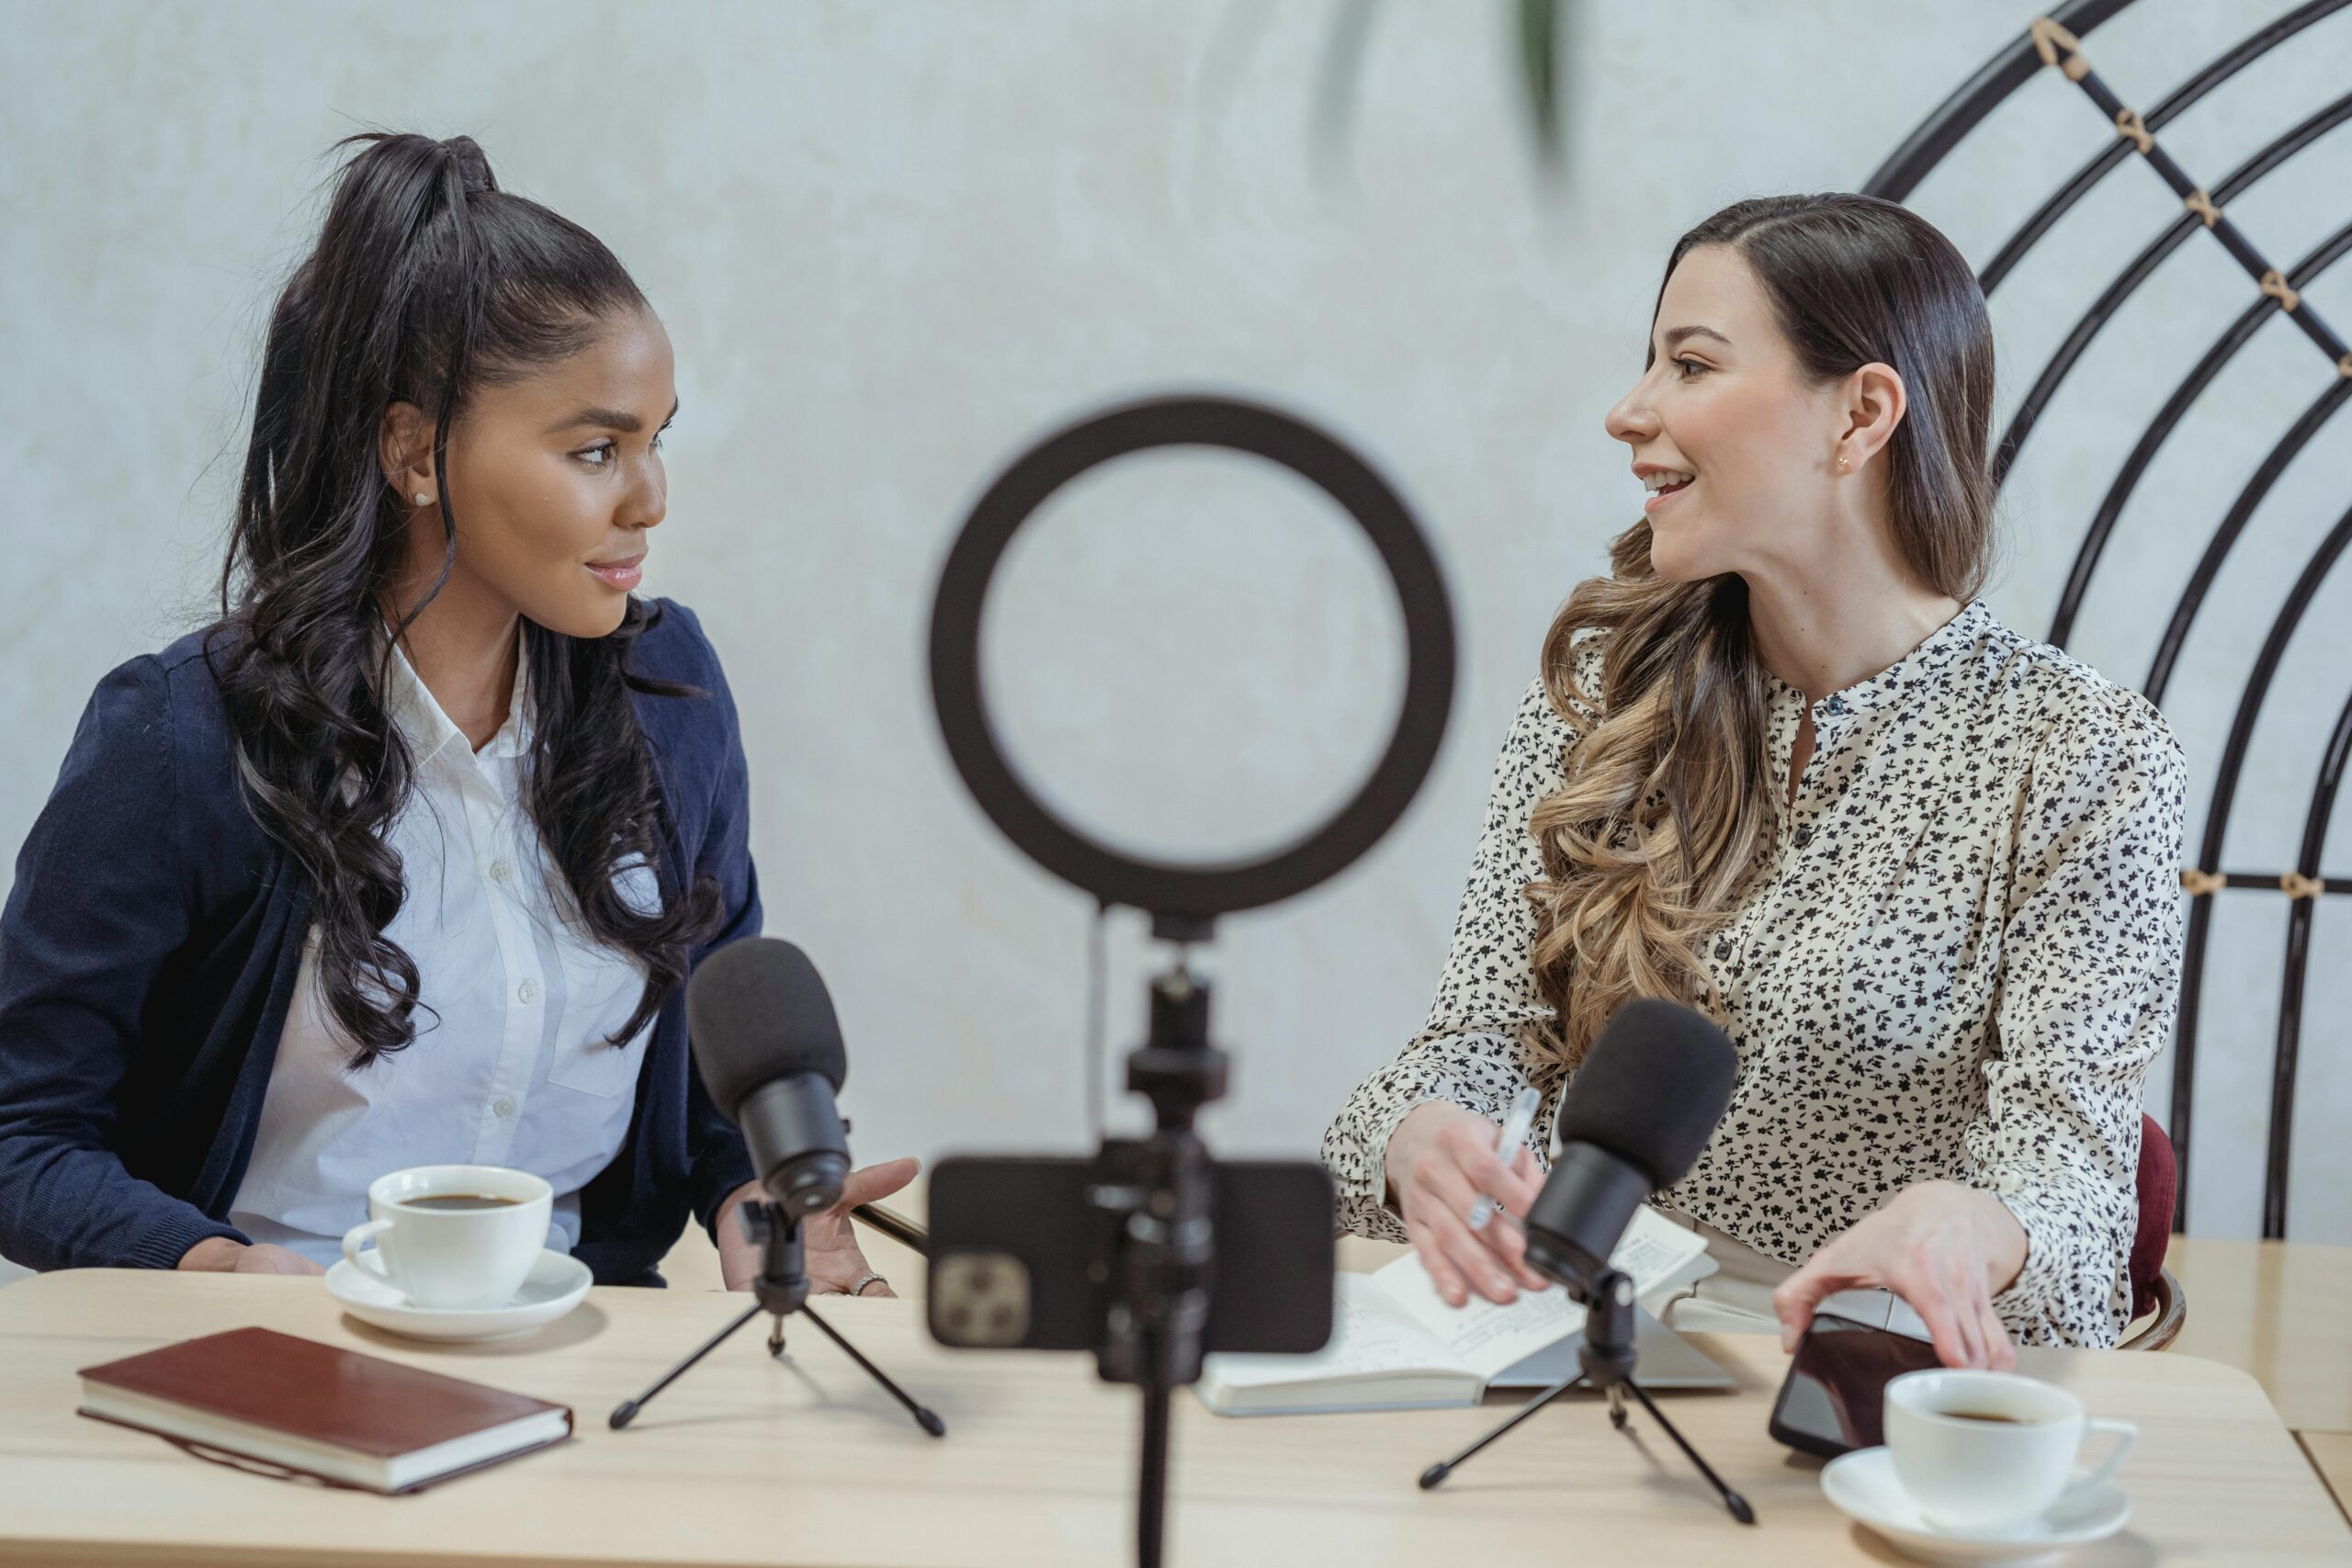 Two women talking into podcast microphones with a phone camera and ring light set up in front of them.